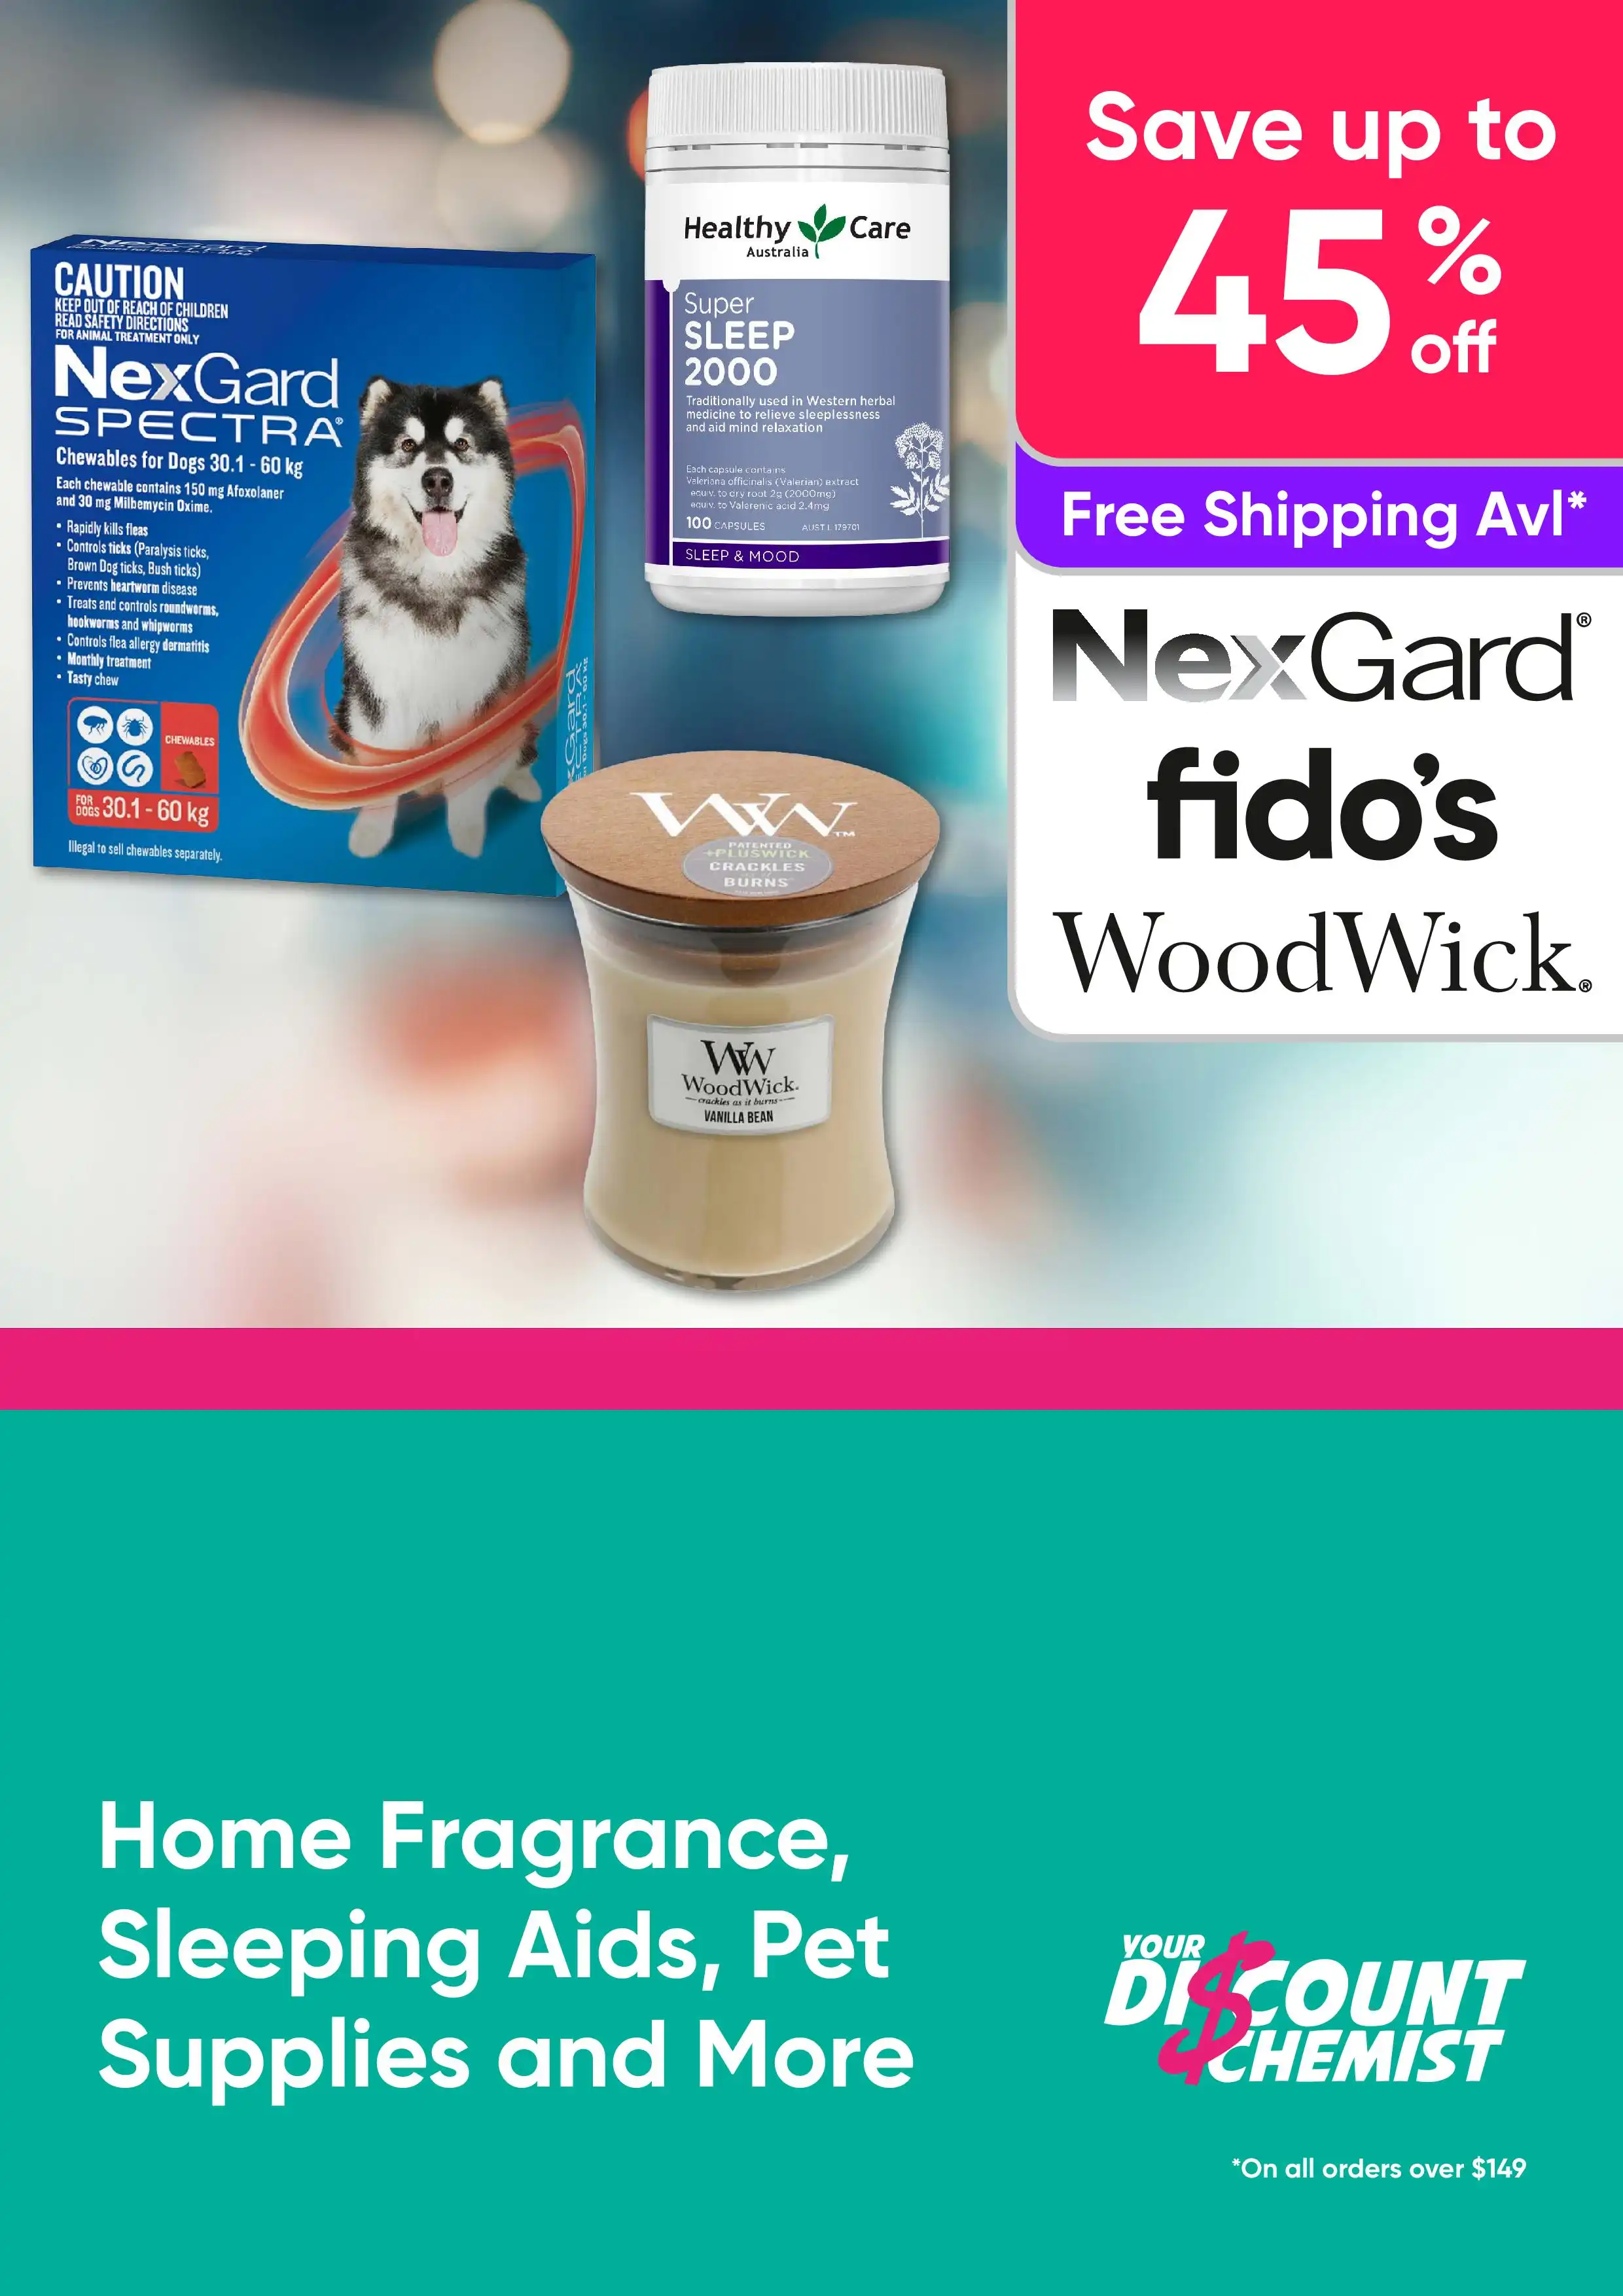 Home Fragrance, Sleeping Aids, Pet Supplies and More on Sale Up to 45% Off